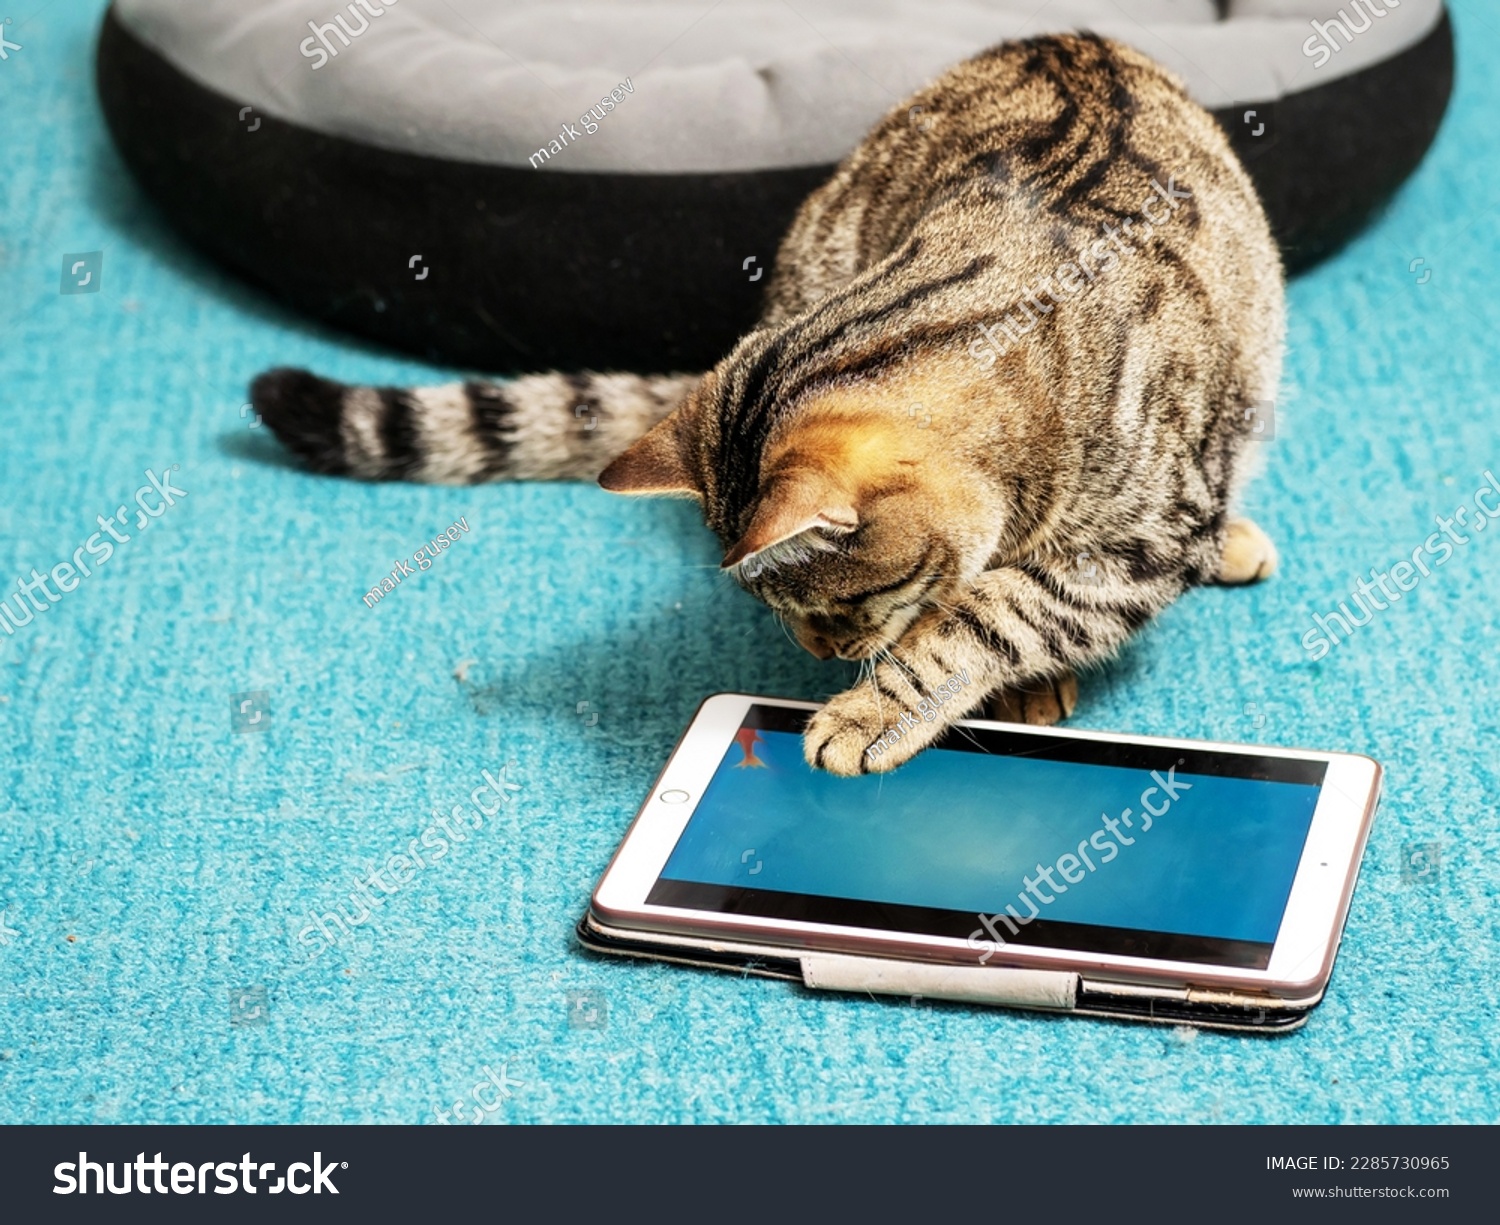 Cute tubby cat looking at a blue tablet screen sitting on a blue color carpet at home. Pet care and entertainment. Internet use for animals. Online gambling and games addiction concept. #2285730965